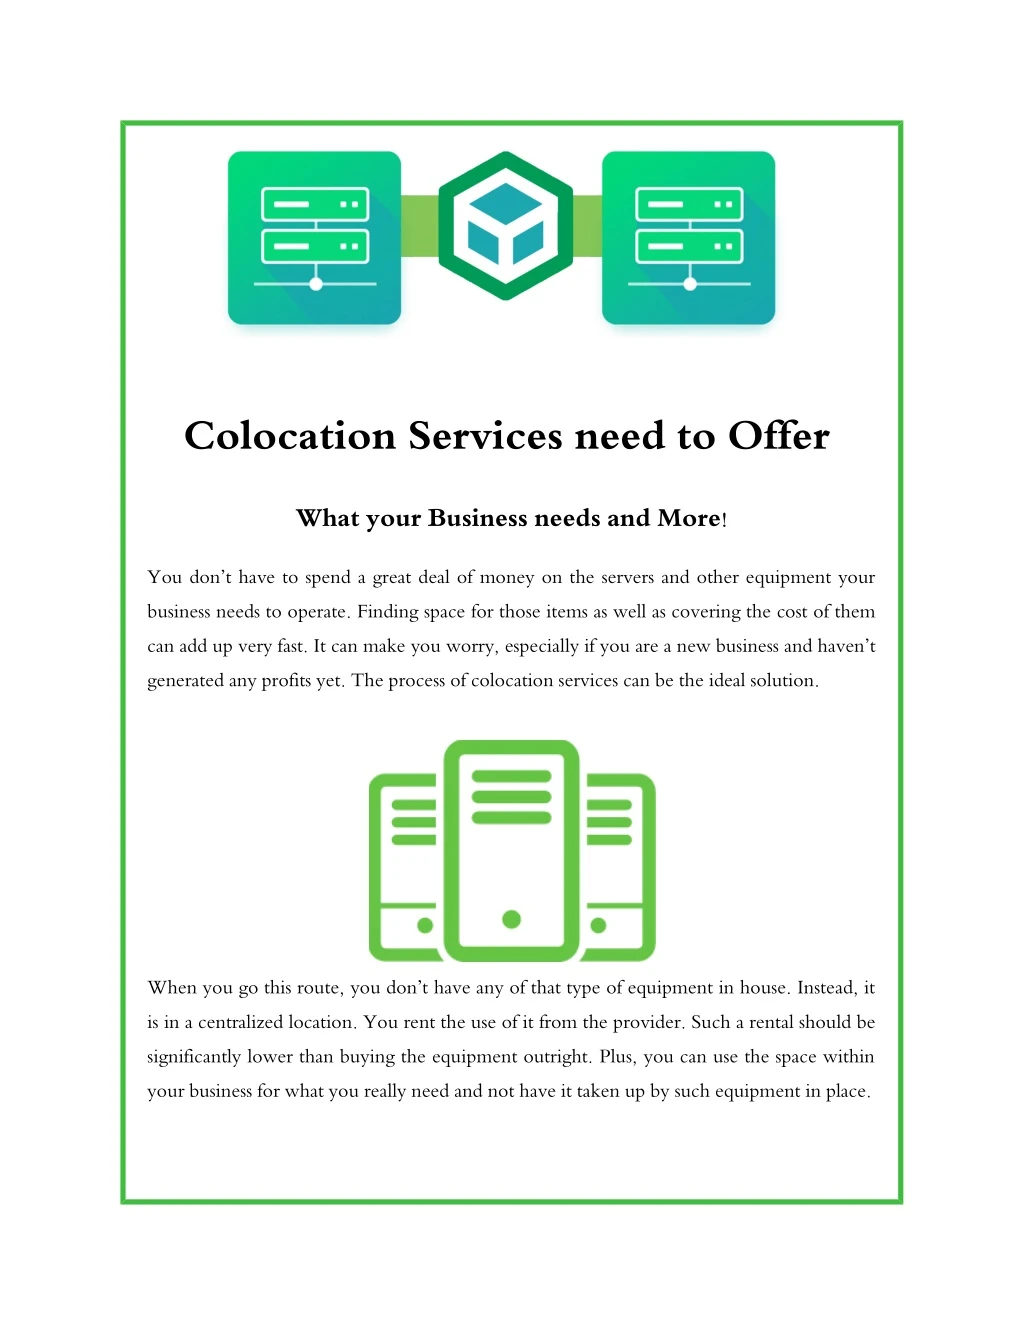 colocation services need to offer